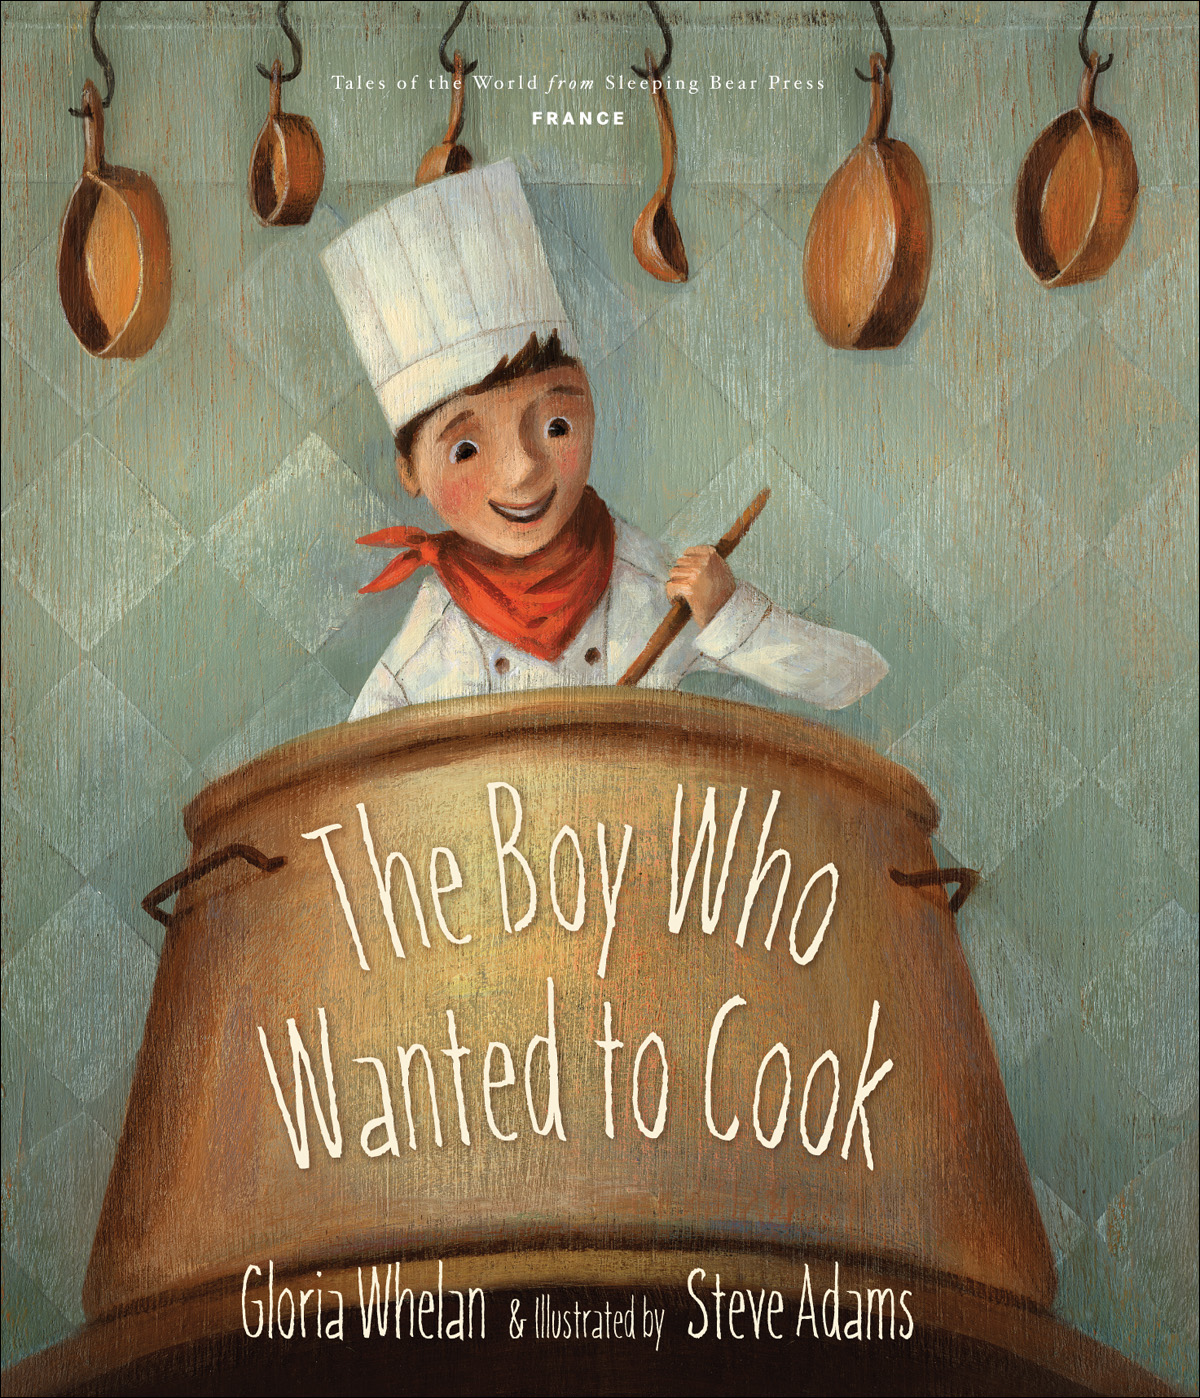 The Boy Who Wanted to Cook (2011) by Gloria Whelan